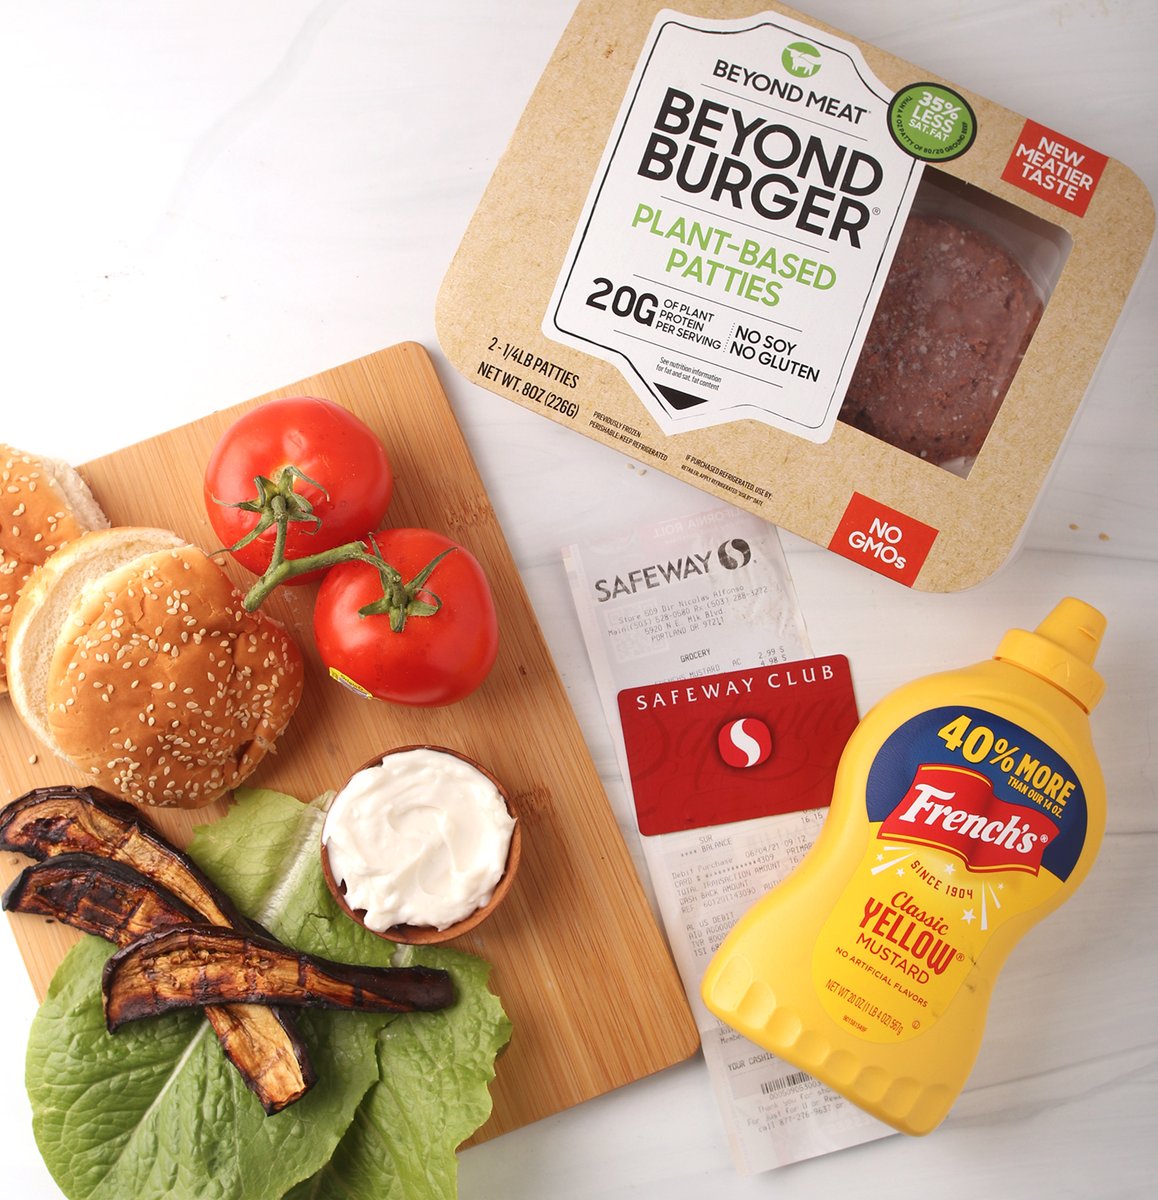 Stock up on @beyondmeat Beyond Burger and @frenchs Classic Yellow Mustard at your local @Safeway. #ad Try my vegan BLT Burger w/ Vegan Bacon. Get a Free 20 oz French's Mustard when you buy a package of Beyond Meat's Beyond Burgers at your local Safeway from 7/21-7/27/21.